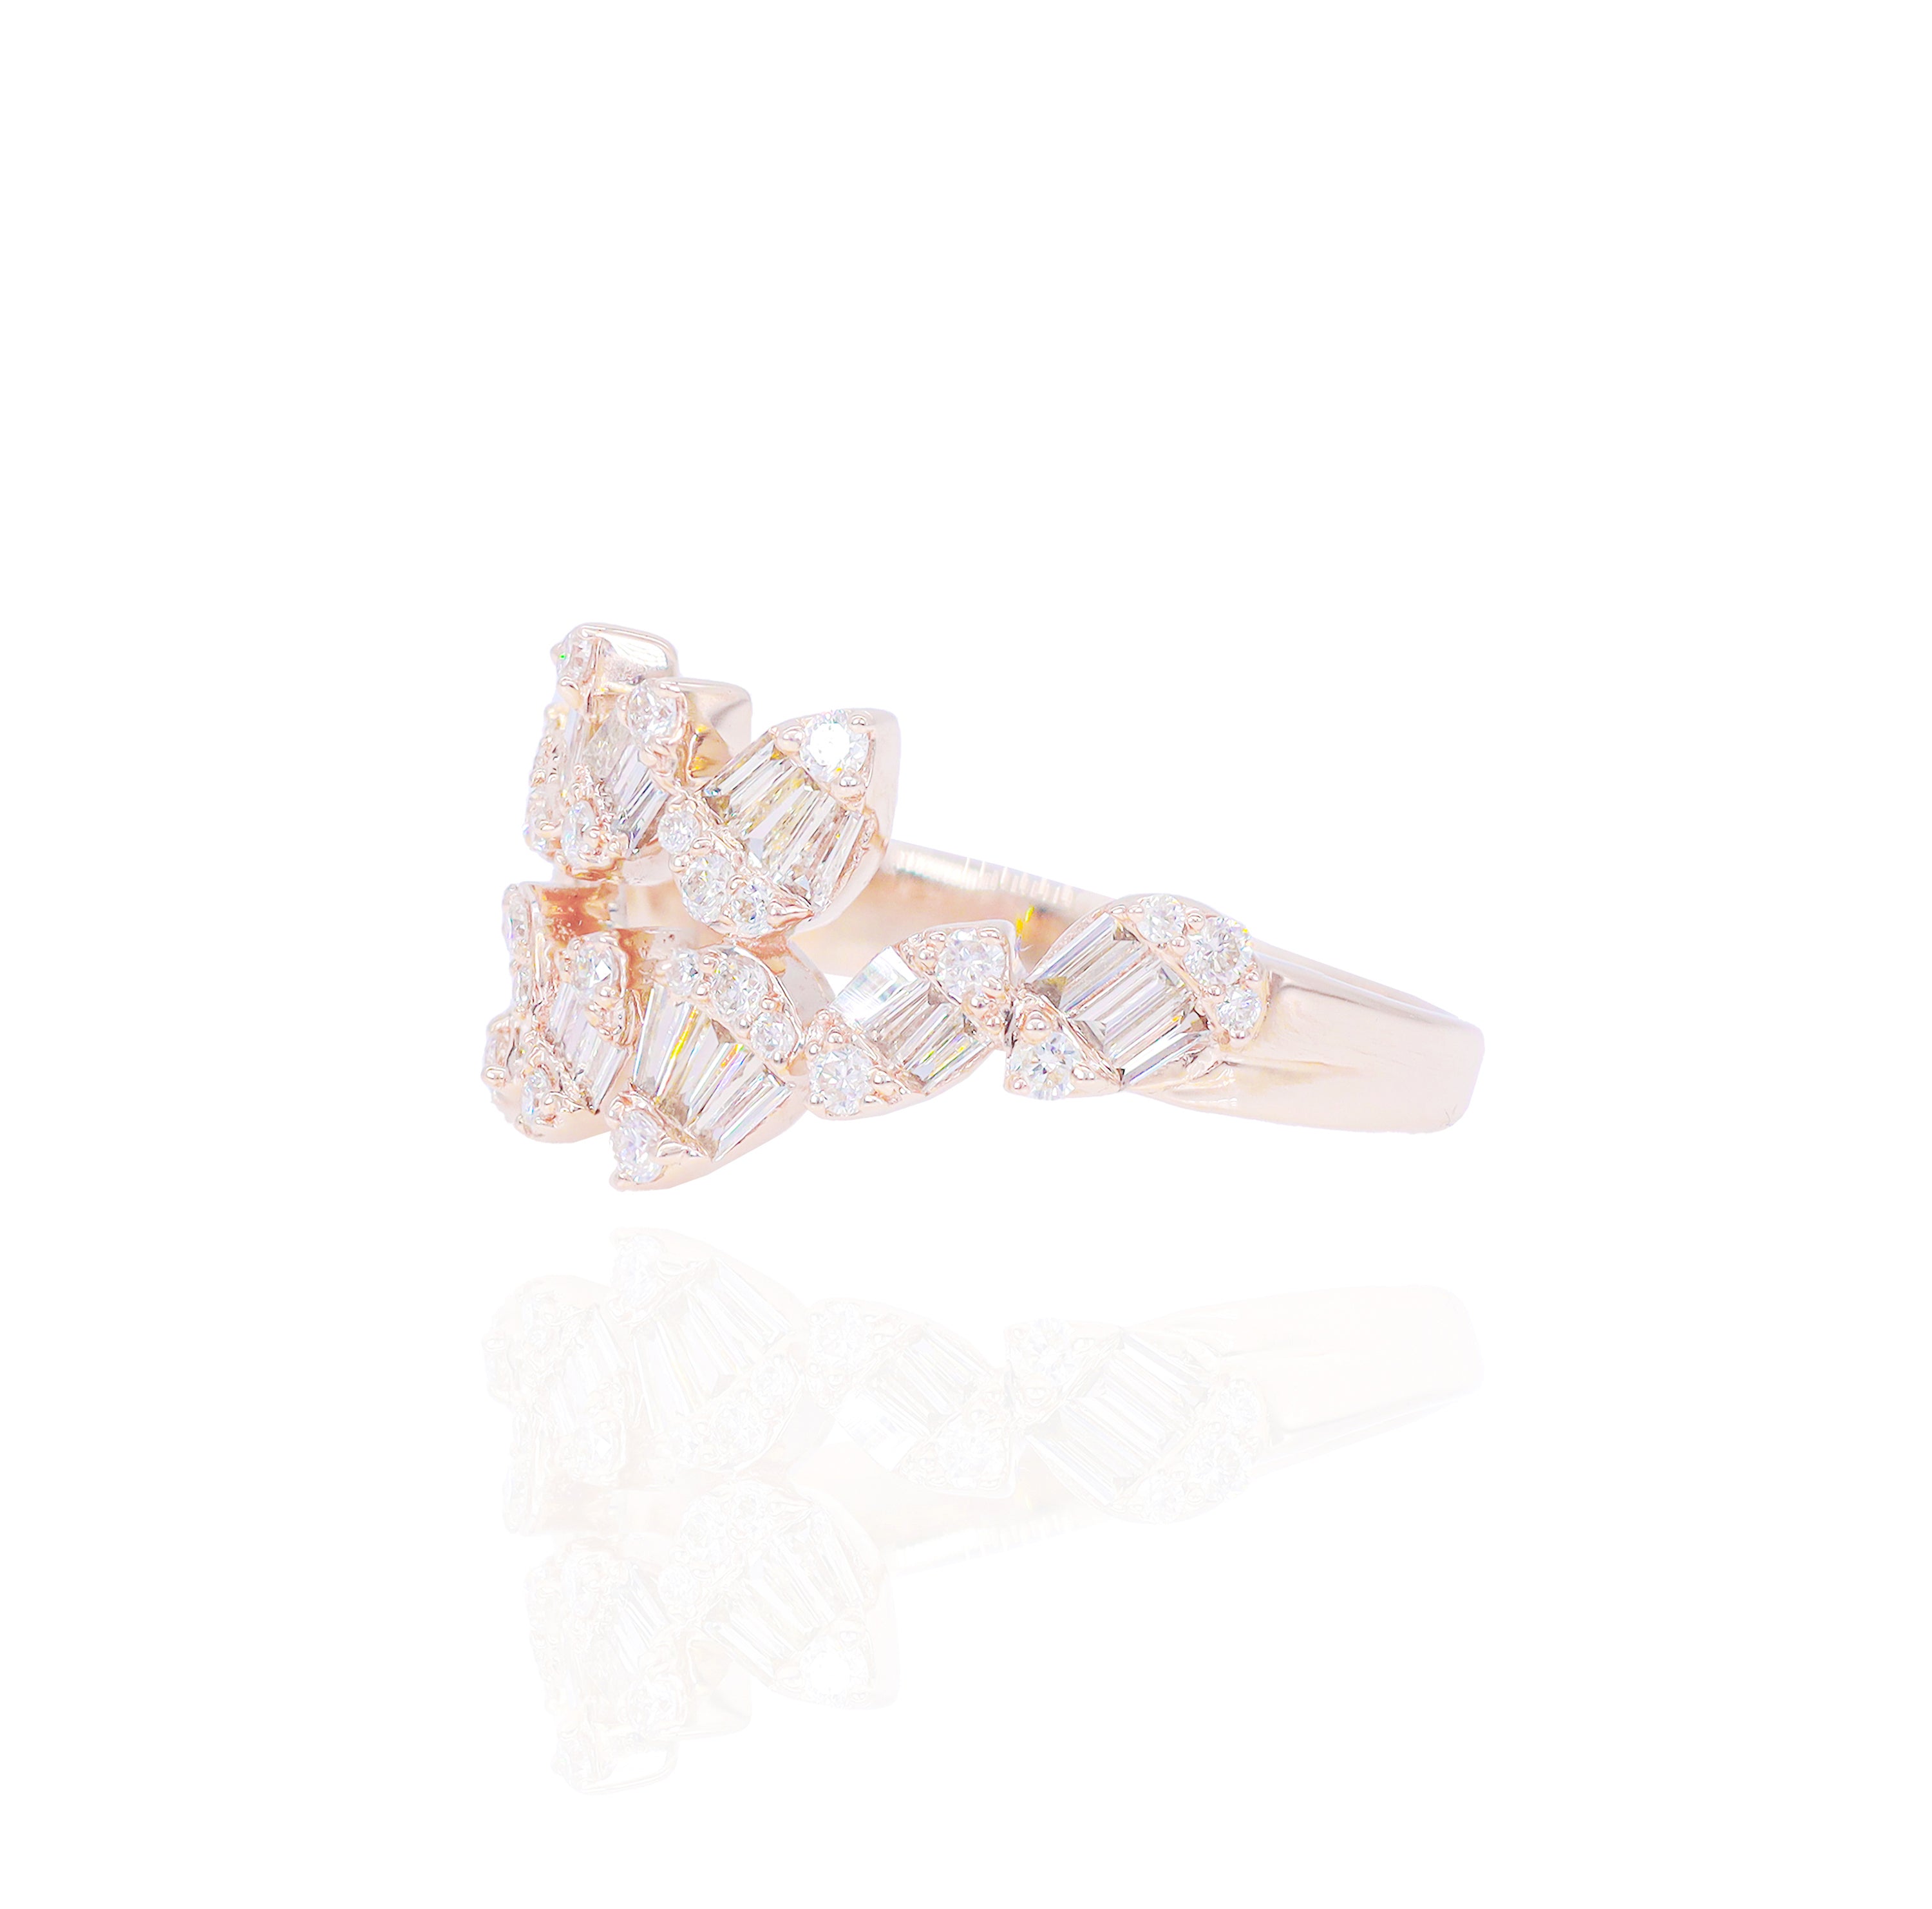 Pear Shape Diamond Cluster Ring Band